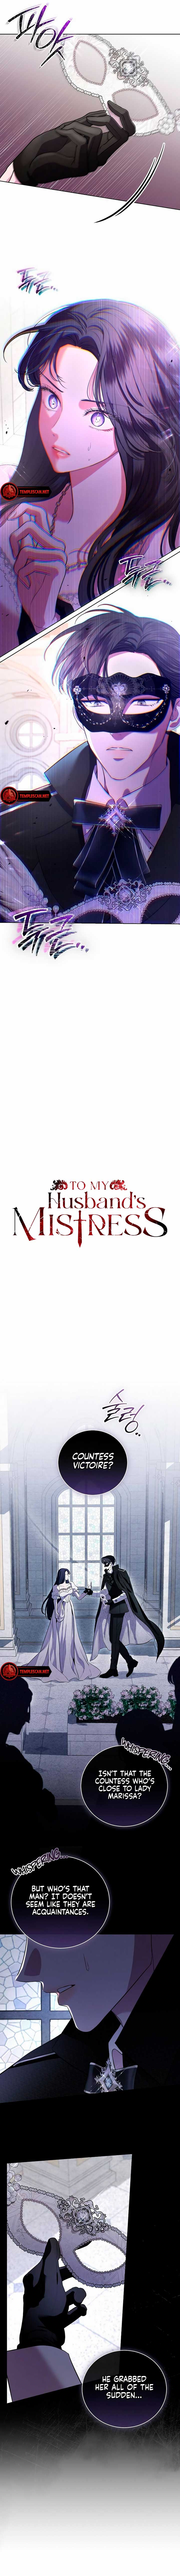 To My Husband’s Mistress chapter 27